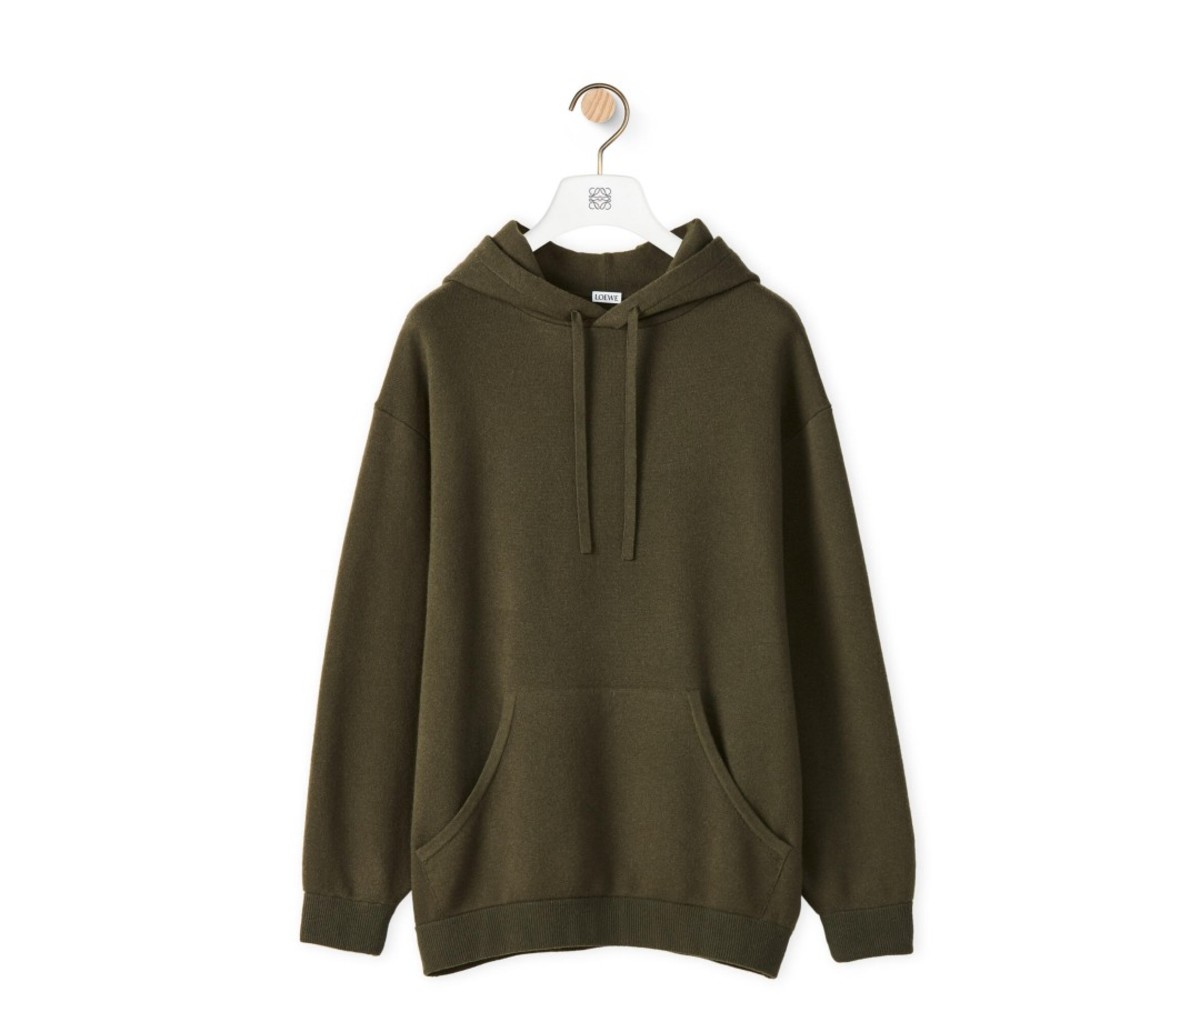 Loewe Knit Hoodie in Wool and Cashmere